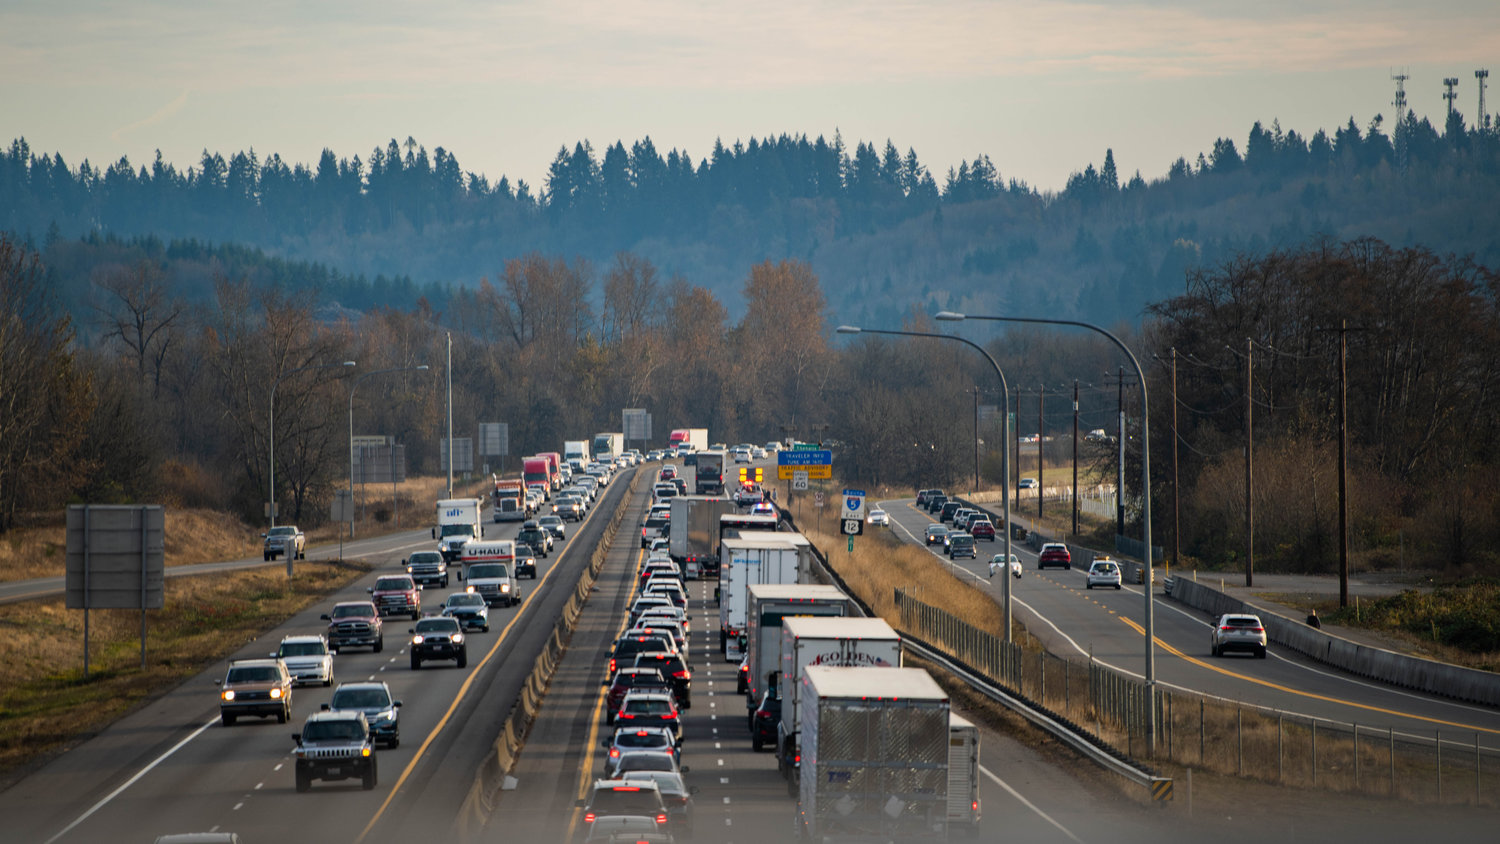 Traffic backs up along Interstate 5 in Centralia as WSDOT responds to the scene of a crash on Sunday.